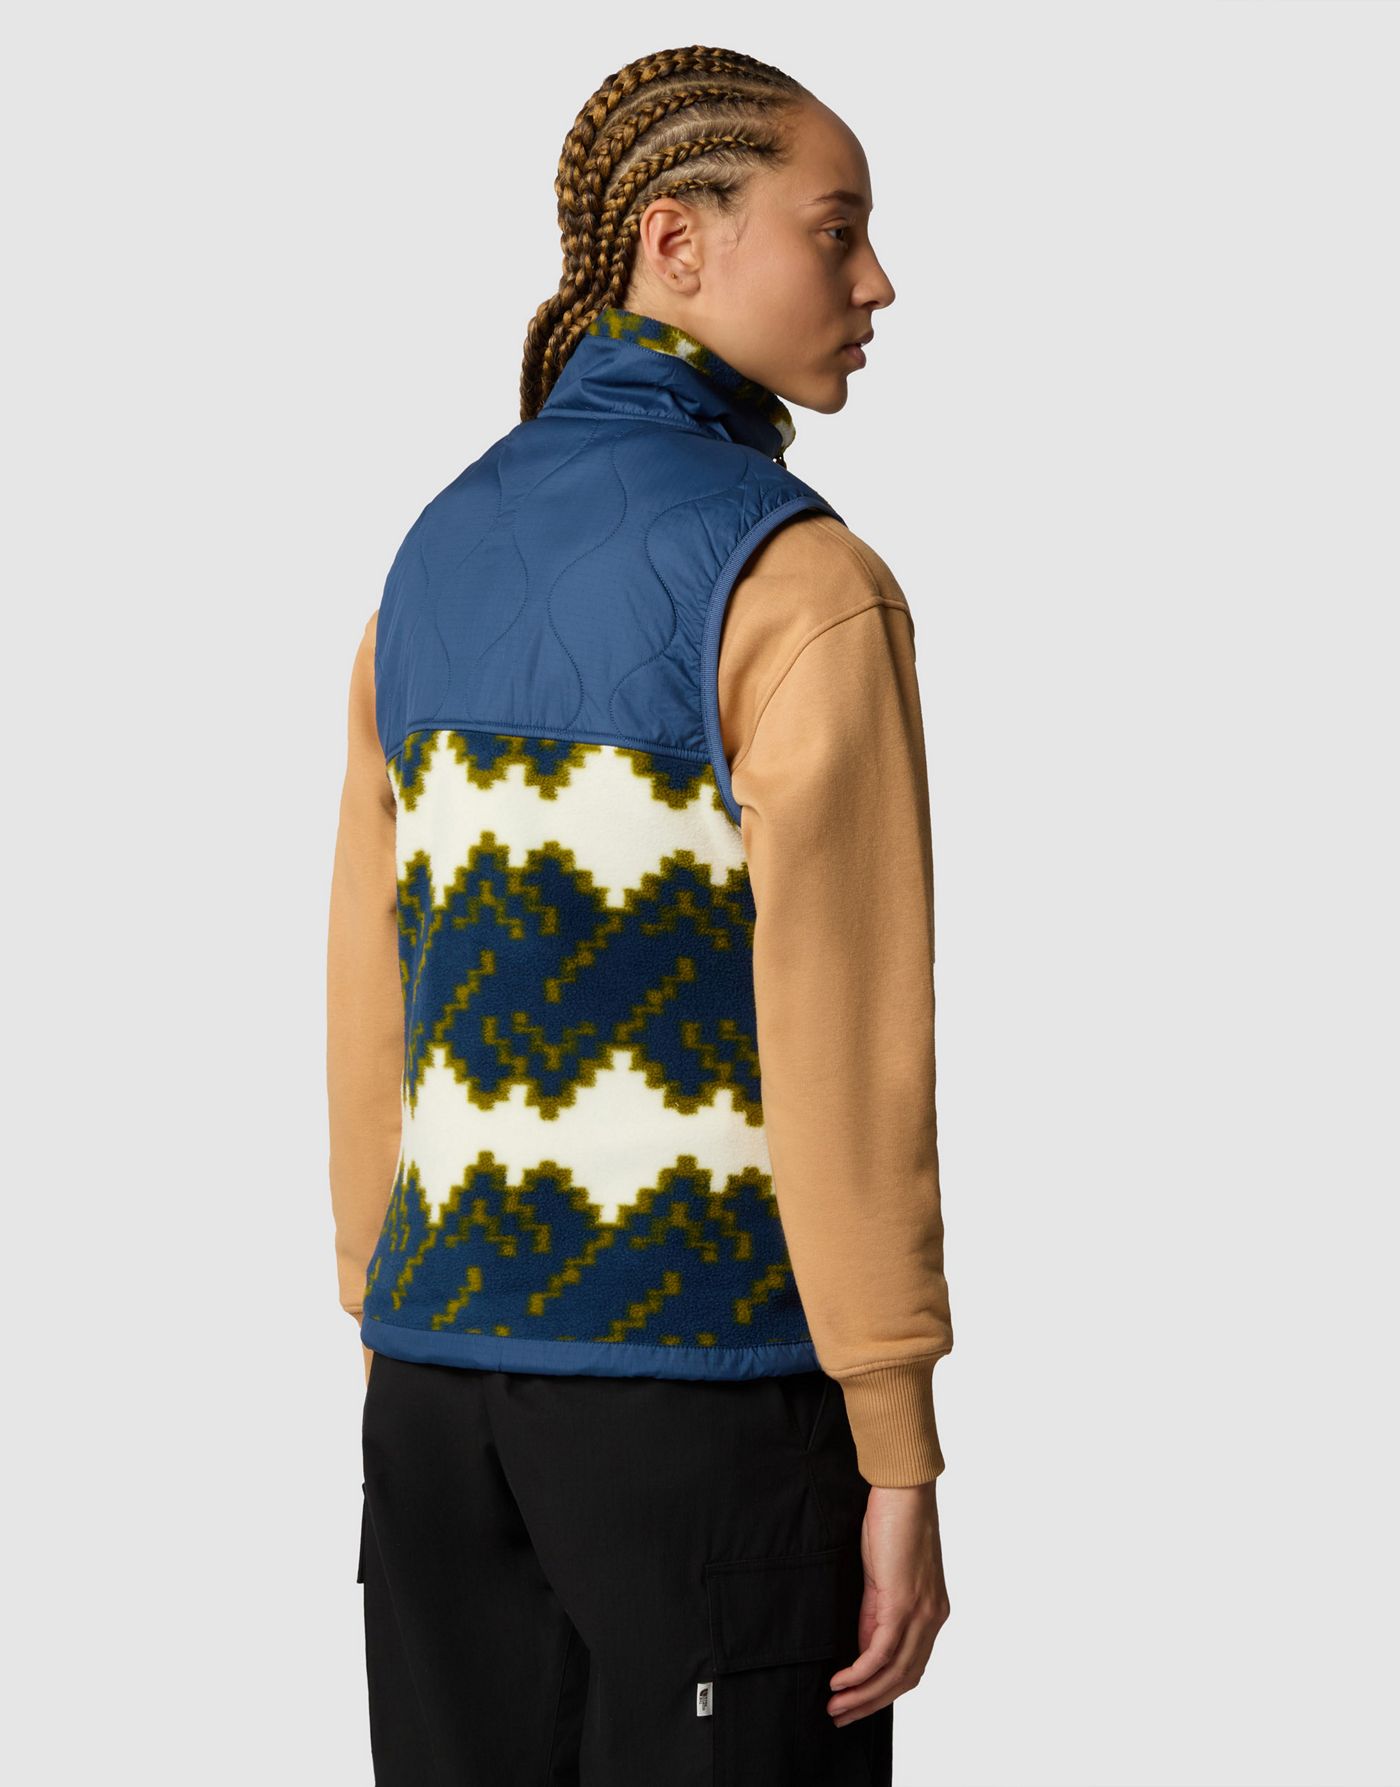 The North Face Royal arch gilet in shady blue mountain geo print